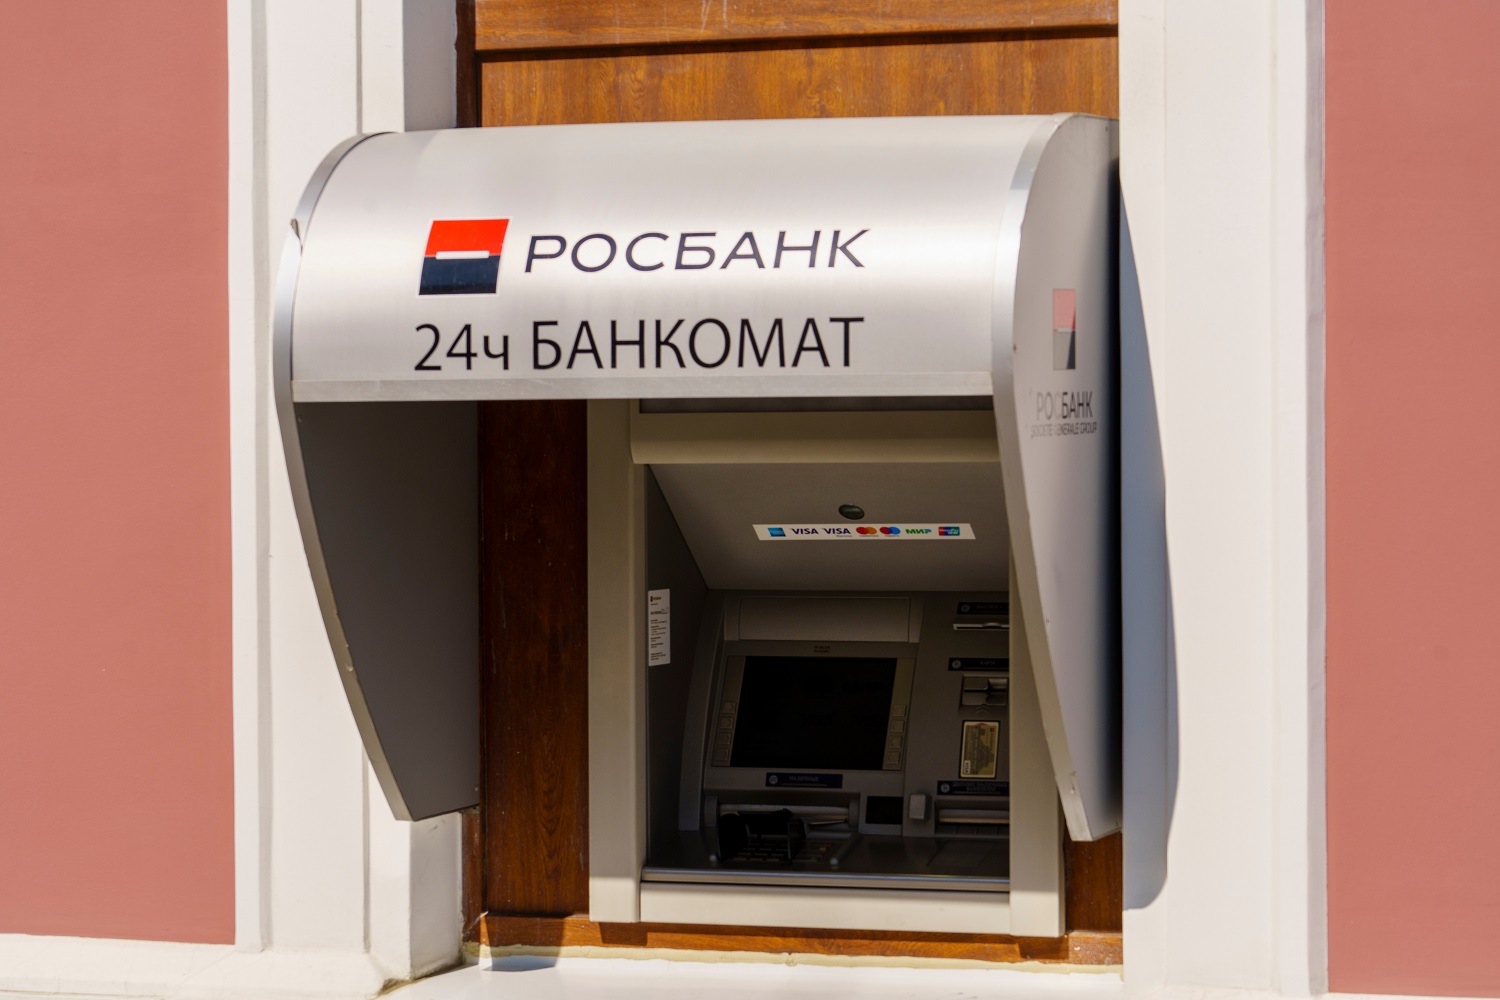 A Rosbank ATM on an urban building in Russia.